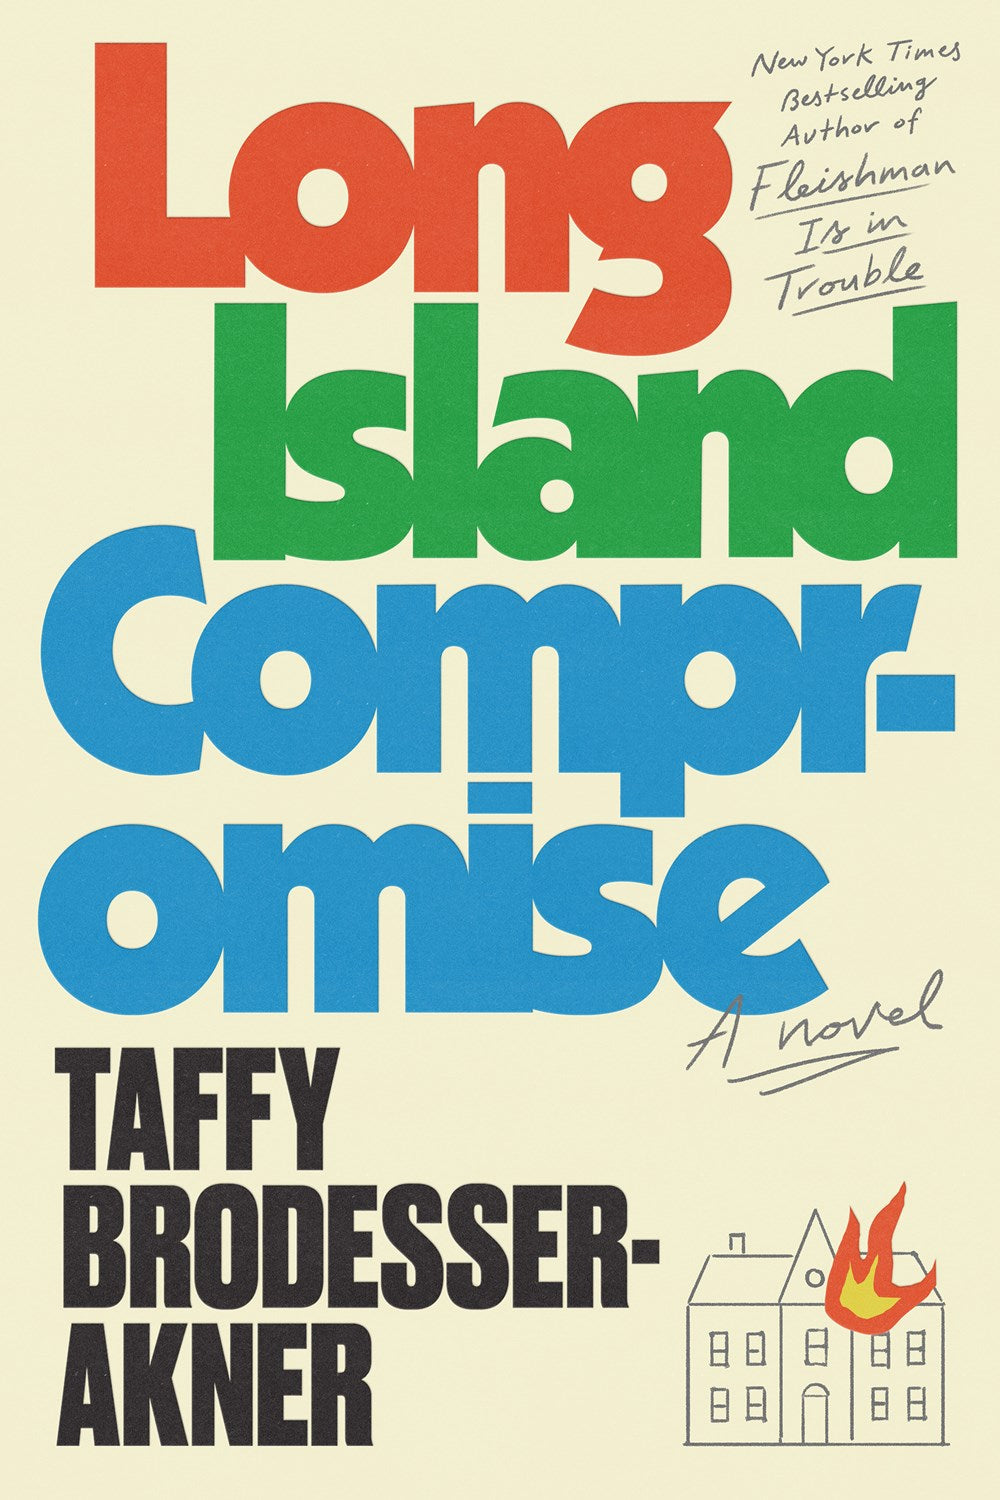 Long Island Compromise: A Novel by Taffy Brodesser-Akner (7/9/24)